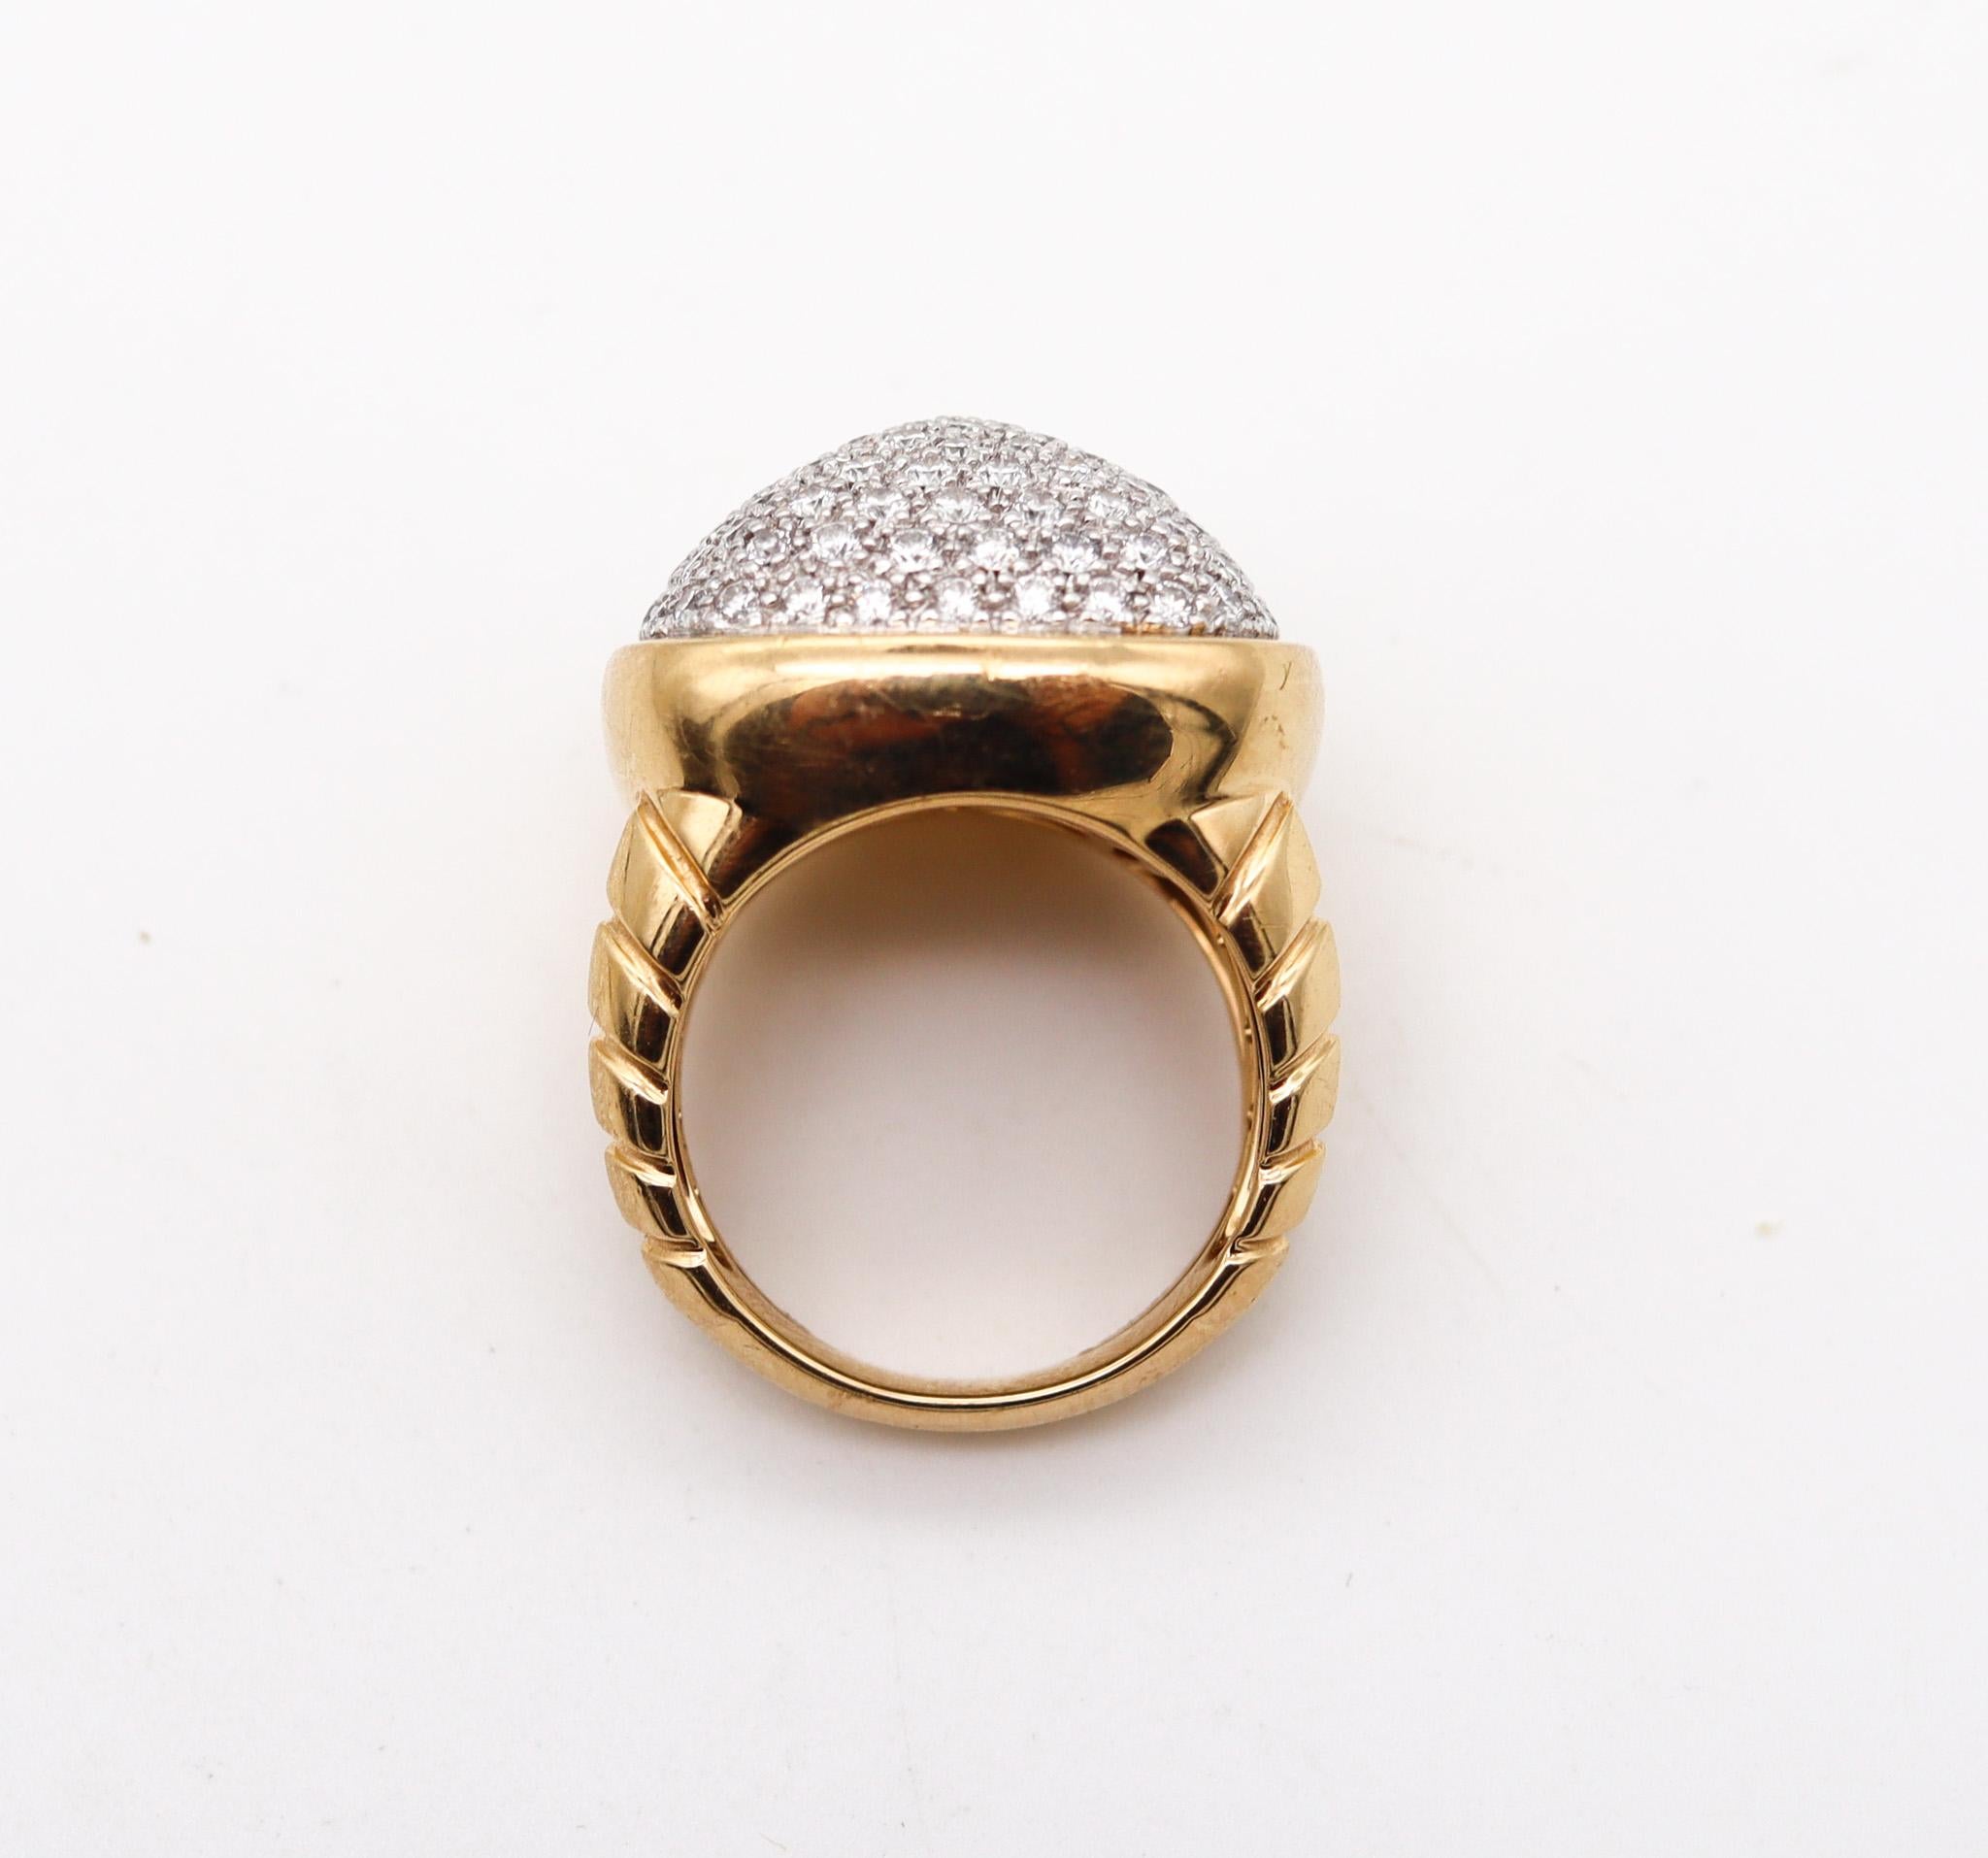 Marina B. Milano Tiguella Pave Cocktail Ring in 18kt Gold with 2.55ctw Diamonds For Sale 1